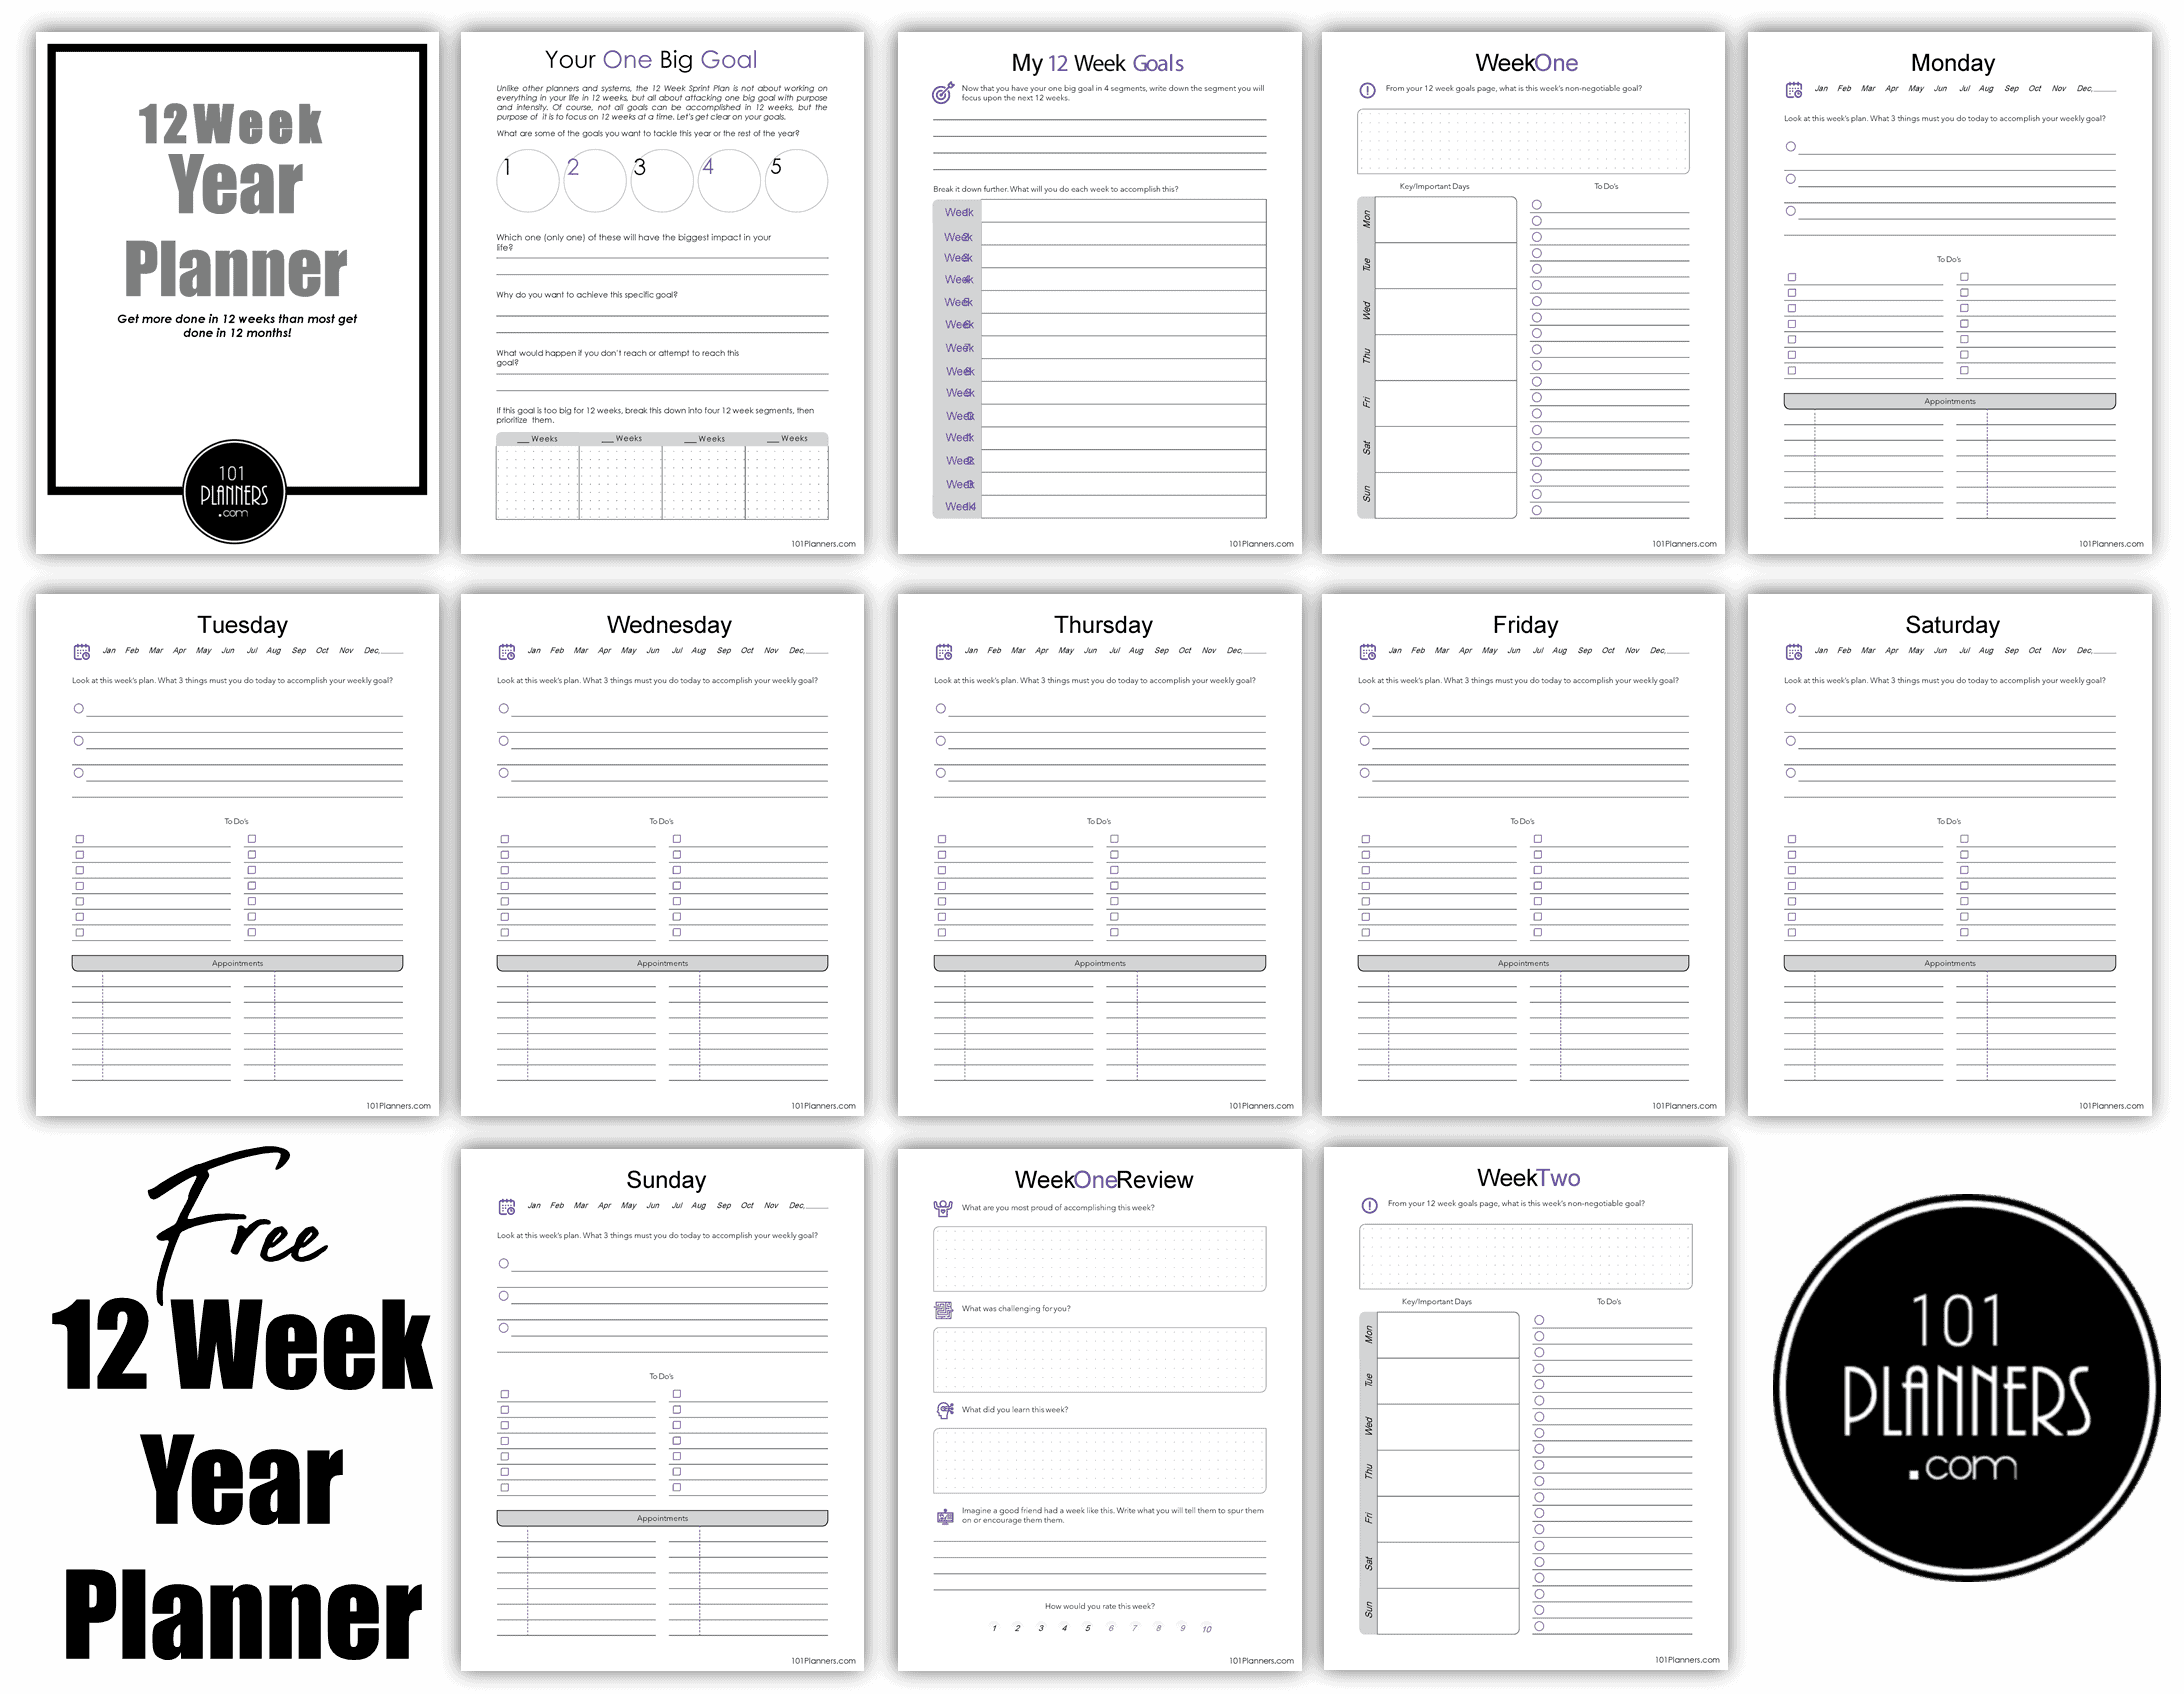 https://www.101planners.com/wp-content/uploads/2020/12/12-week-year-planner.png